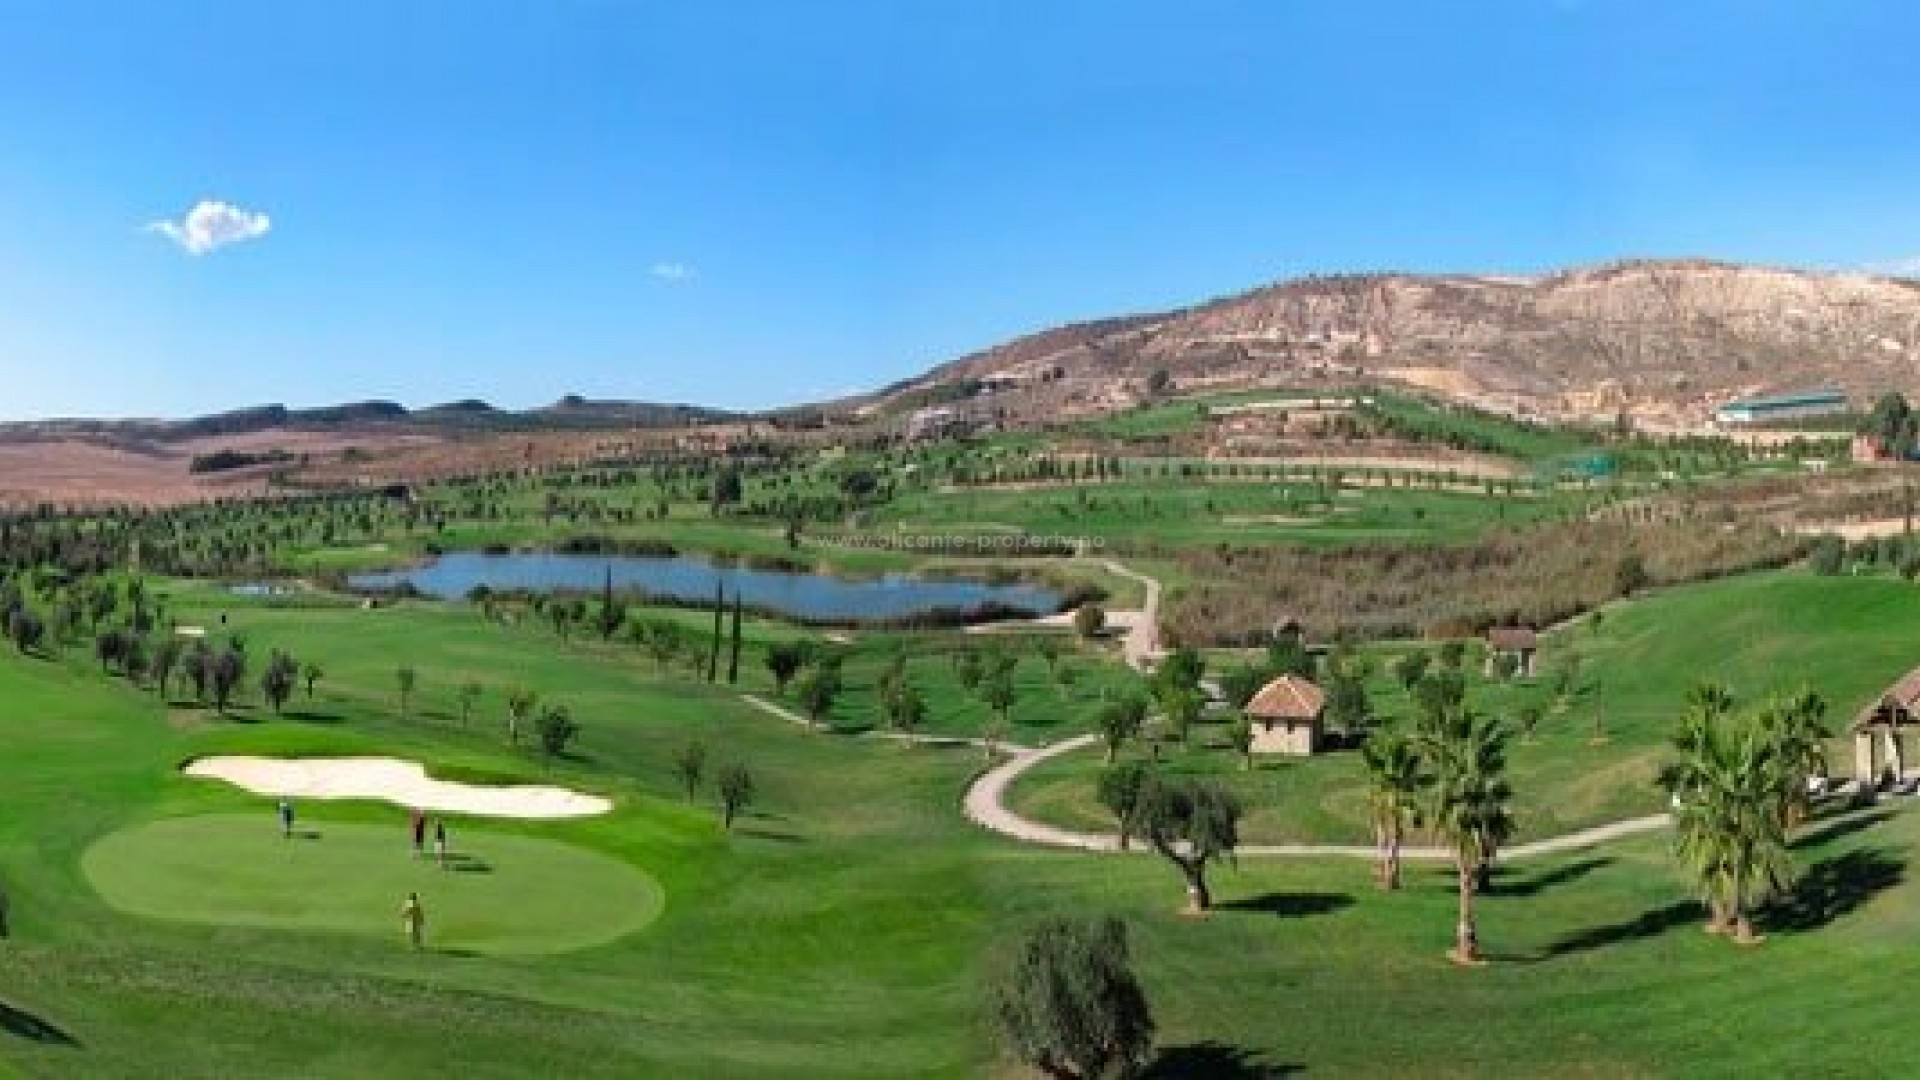 La Finca golf course, Algorfa with semi-detached houses, apartments, villas/houses, 3 bedrooms, 2 bathrooms, spacious living room with patio doors leading out to the garden, pool